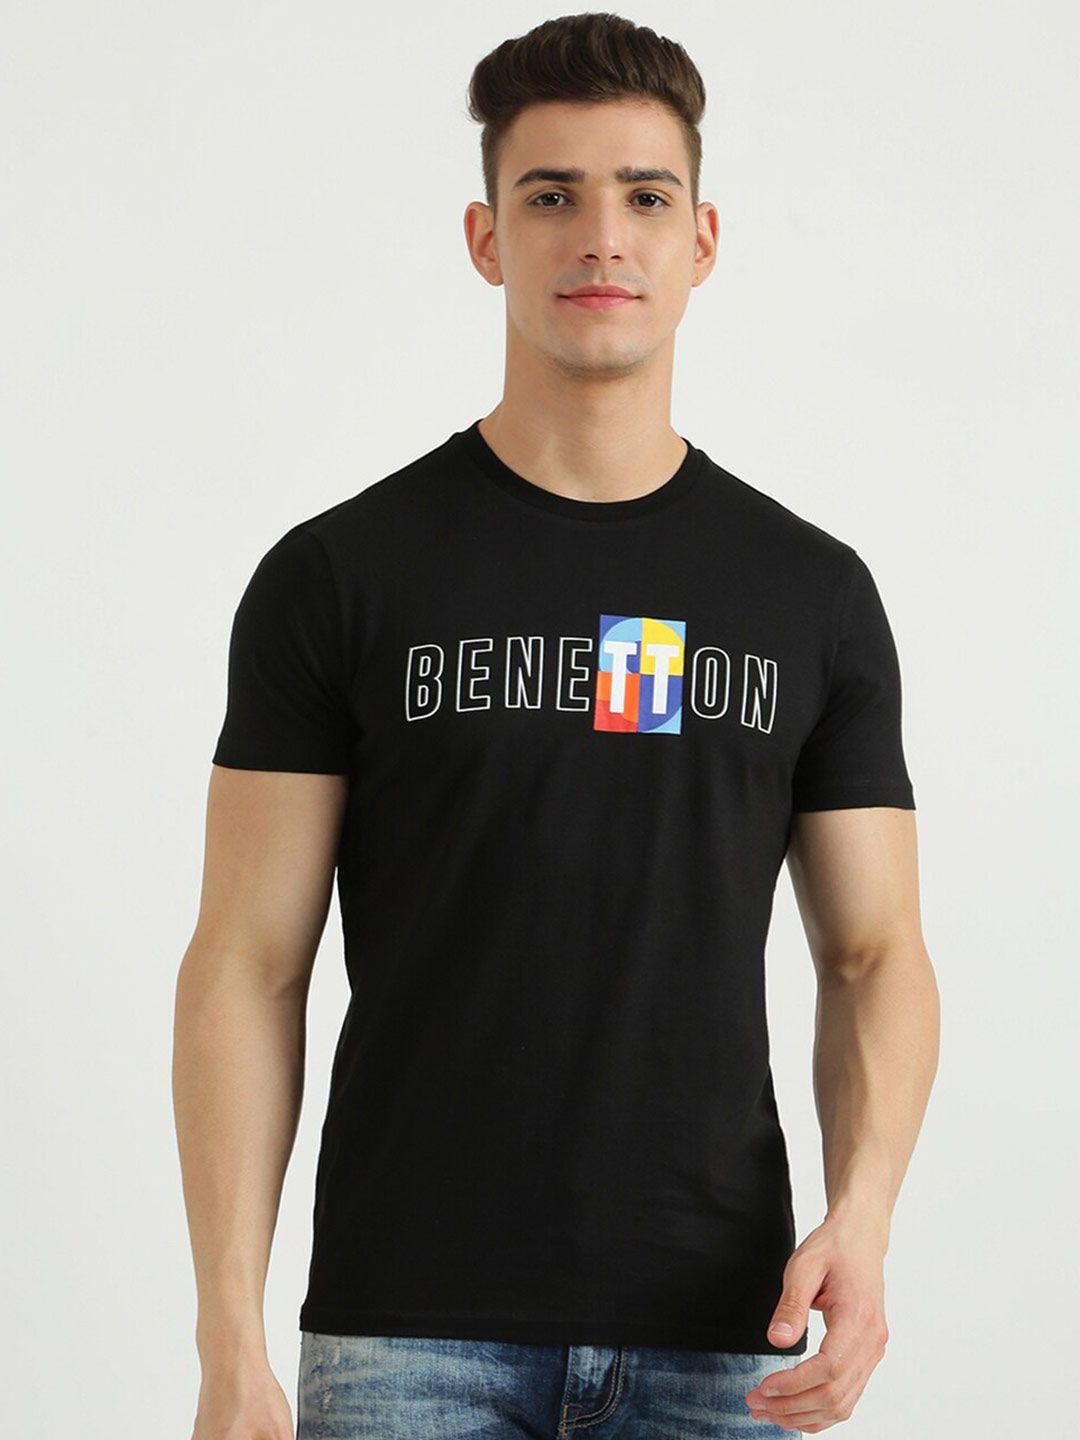 united-colors-of-benetton-men-black-typography-printed-t-shirt